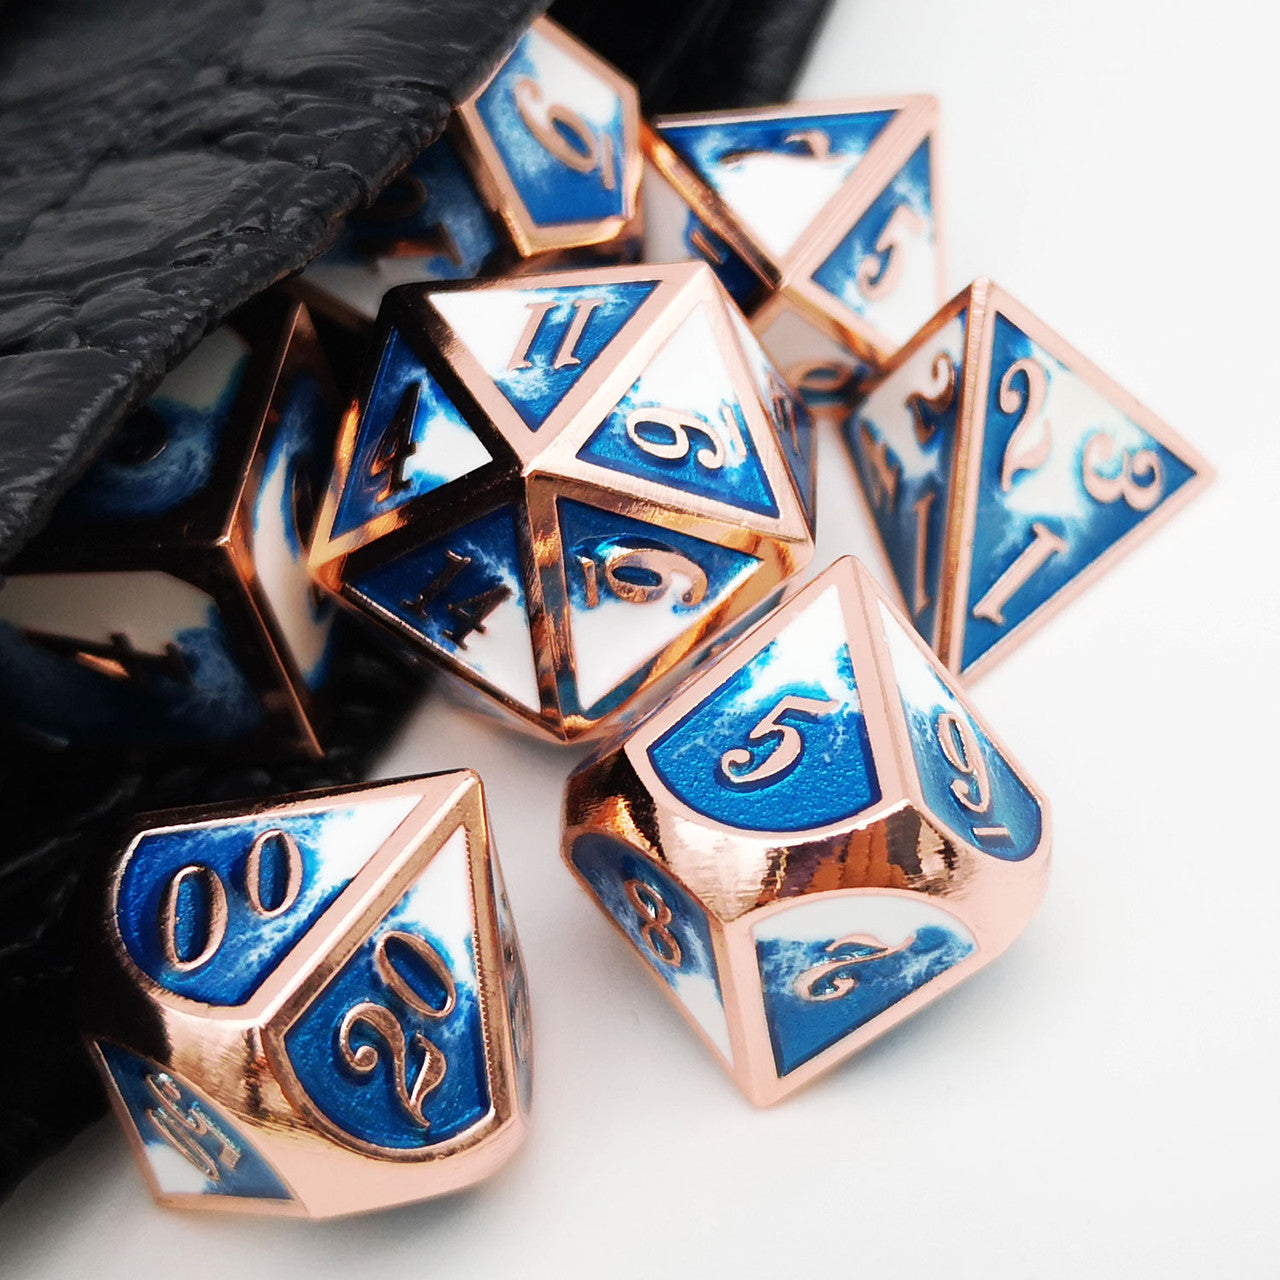 copper dice, ice dice, rosegold dice, blue and white dice, blue dice, white dice